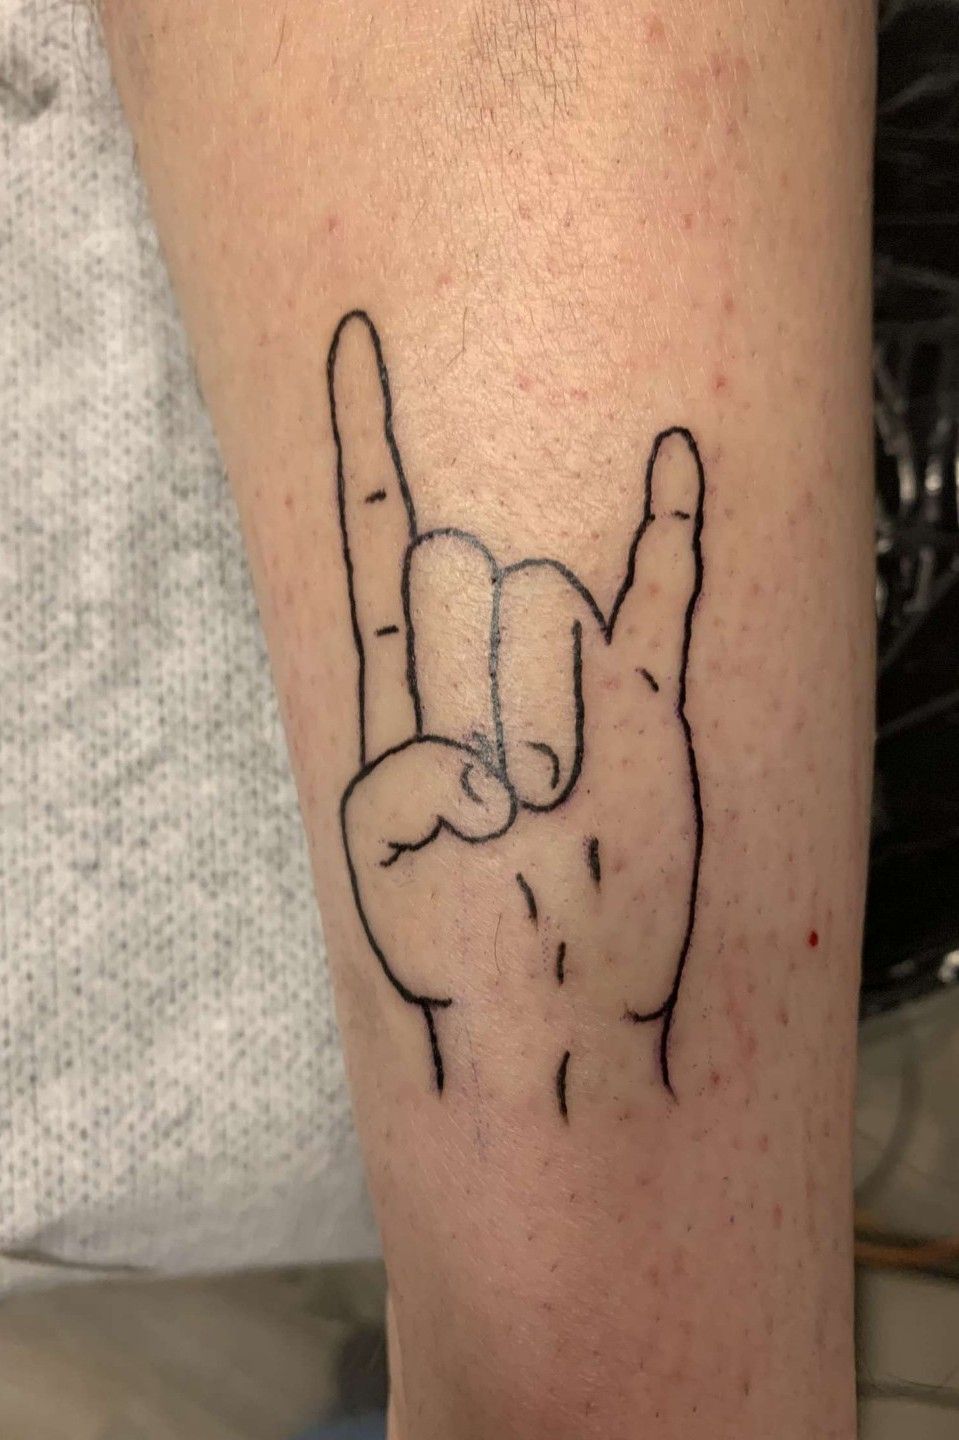 Hang loose and some metal... - Venue Tattoo and Piercing | Facebook